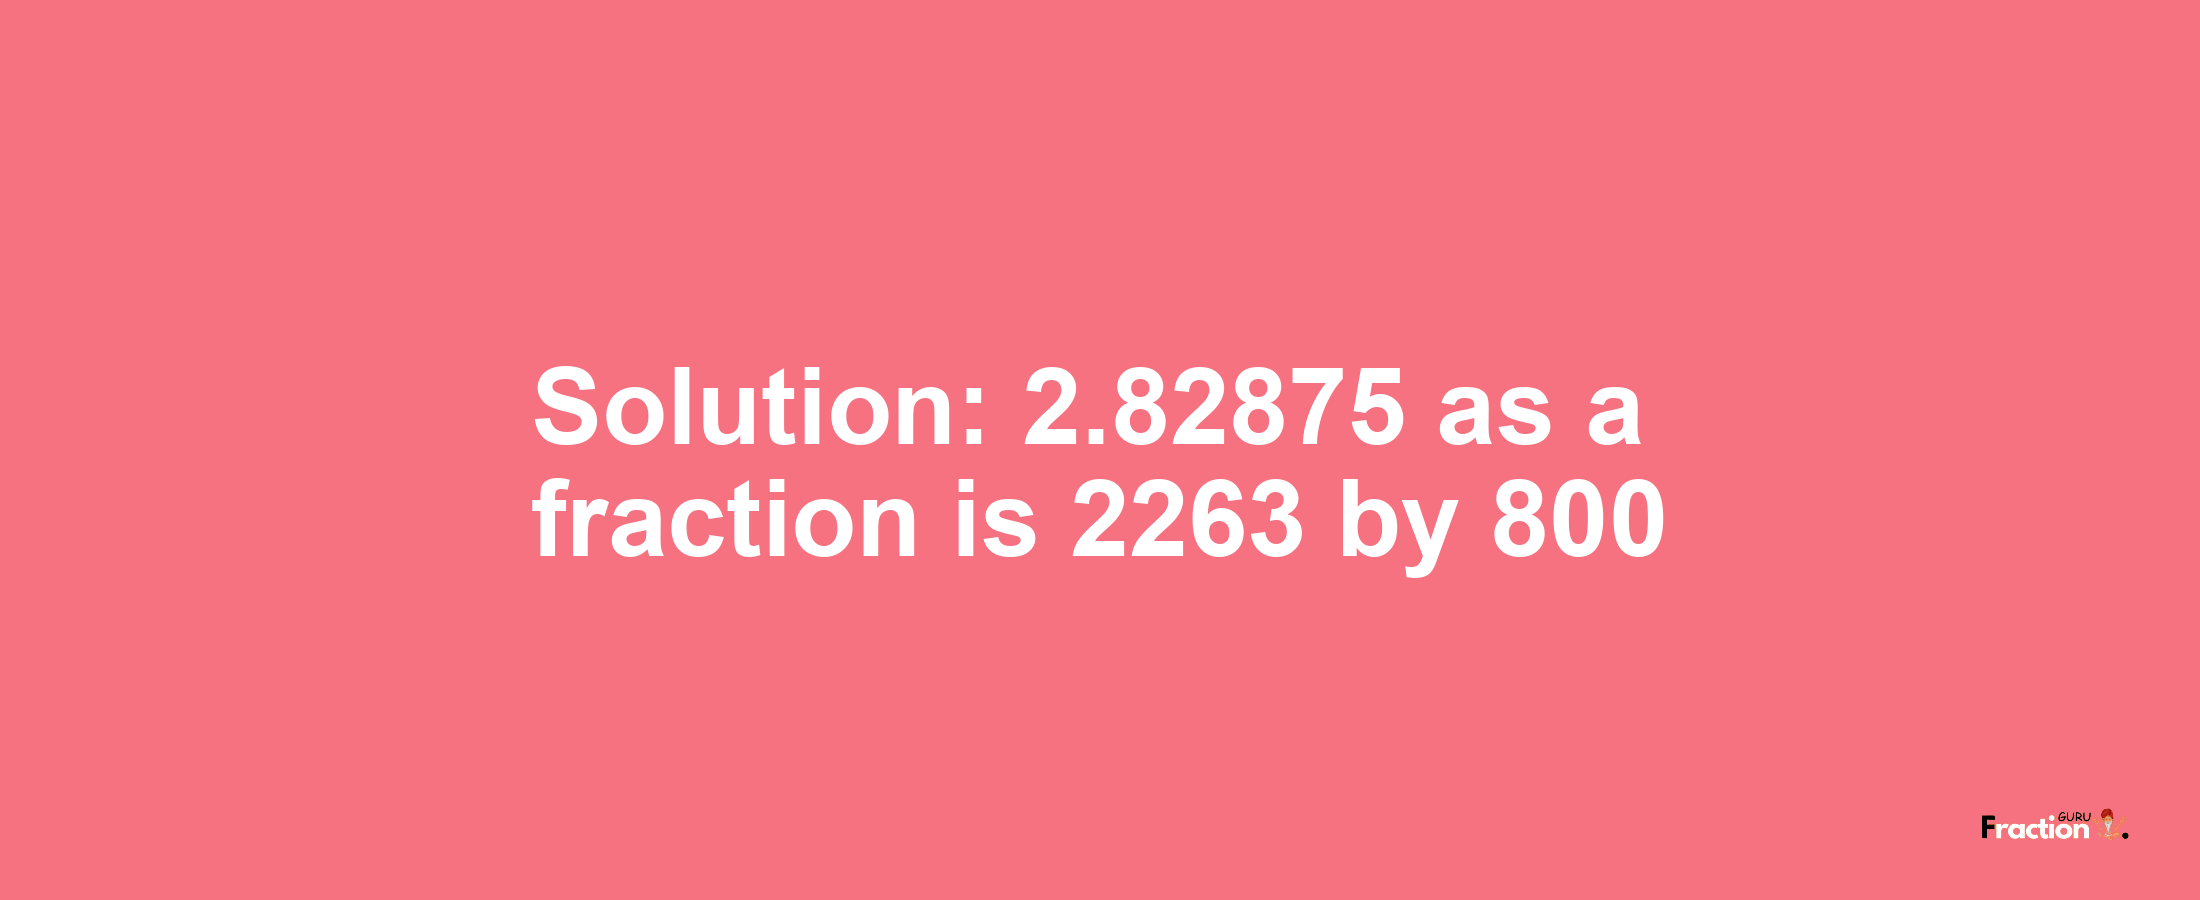 Solution:2.82875 as a fraction is 2263/800